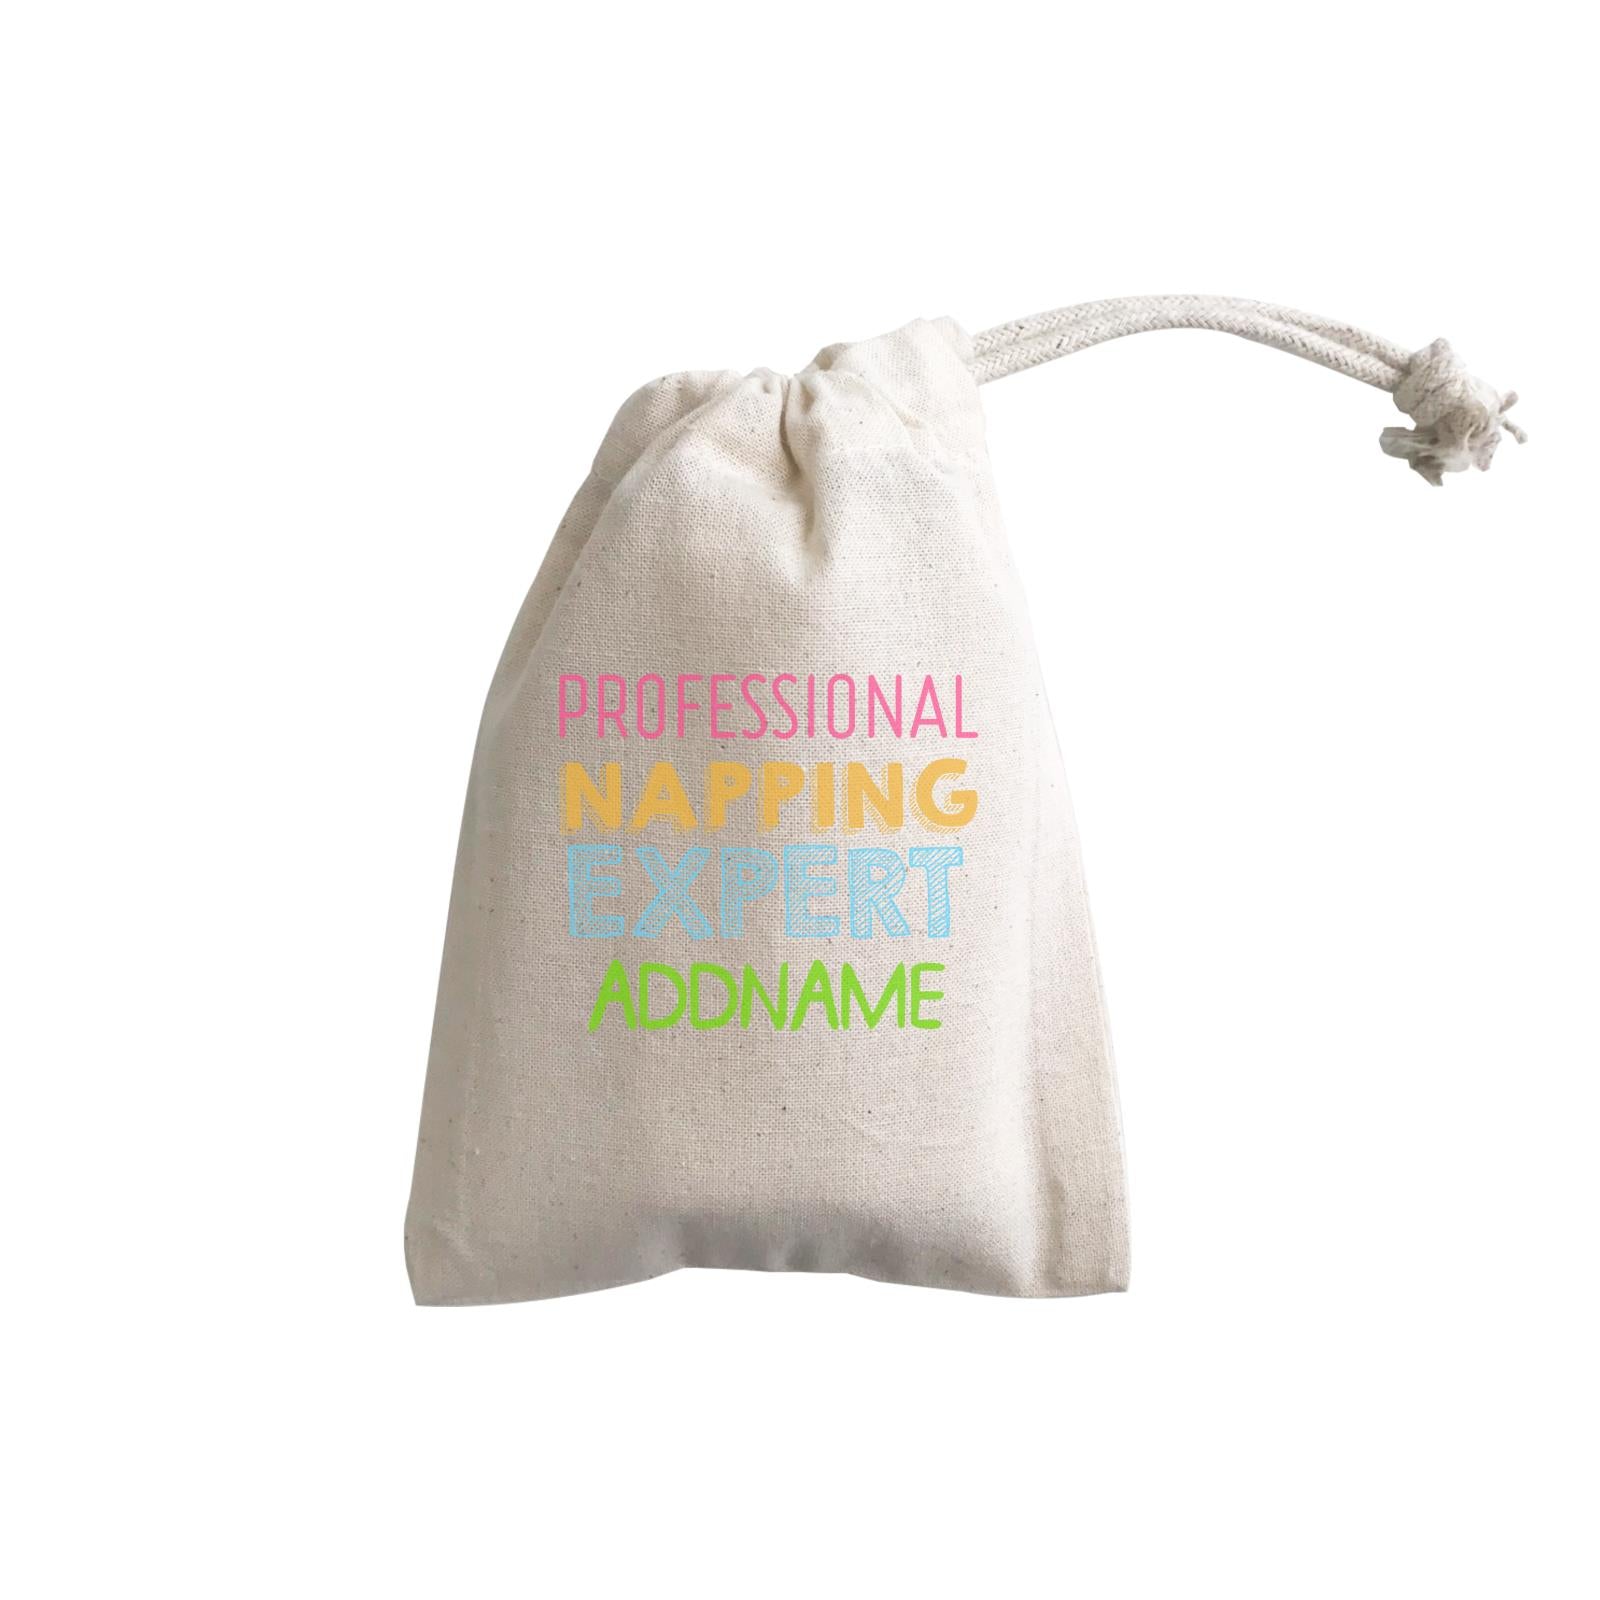 Professional Napping Expert Addname GP Gift Pouch